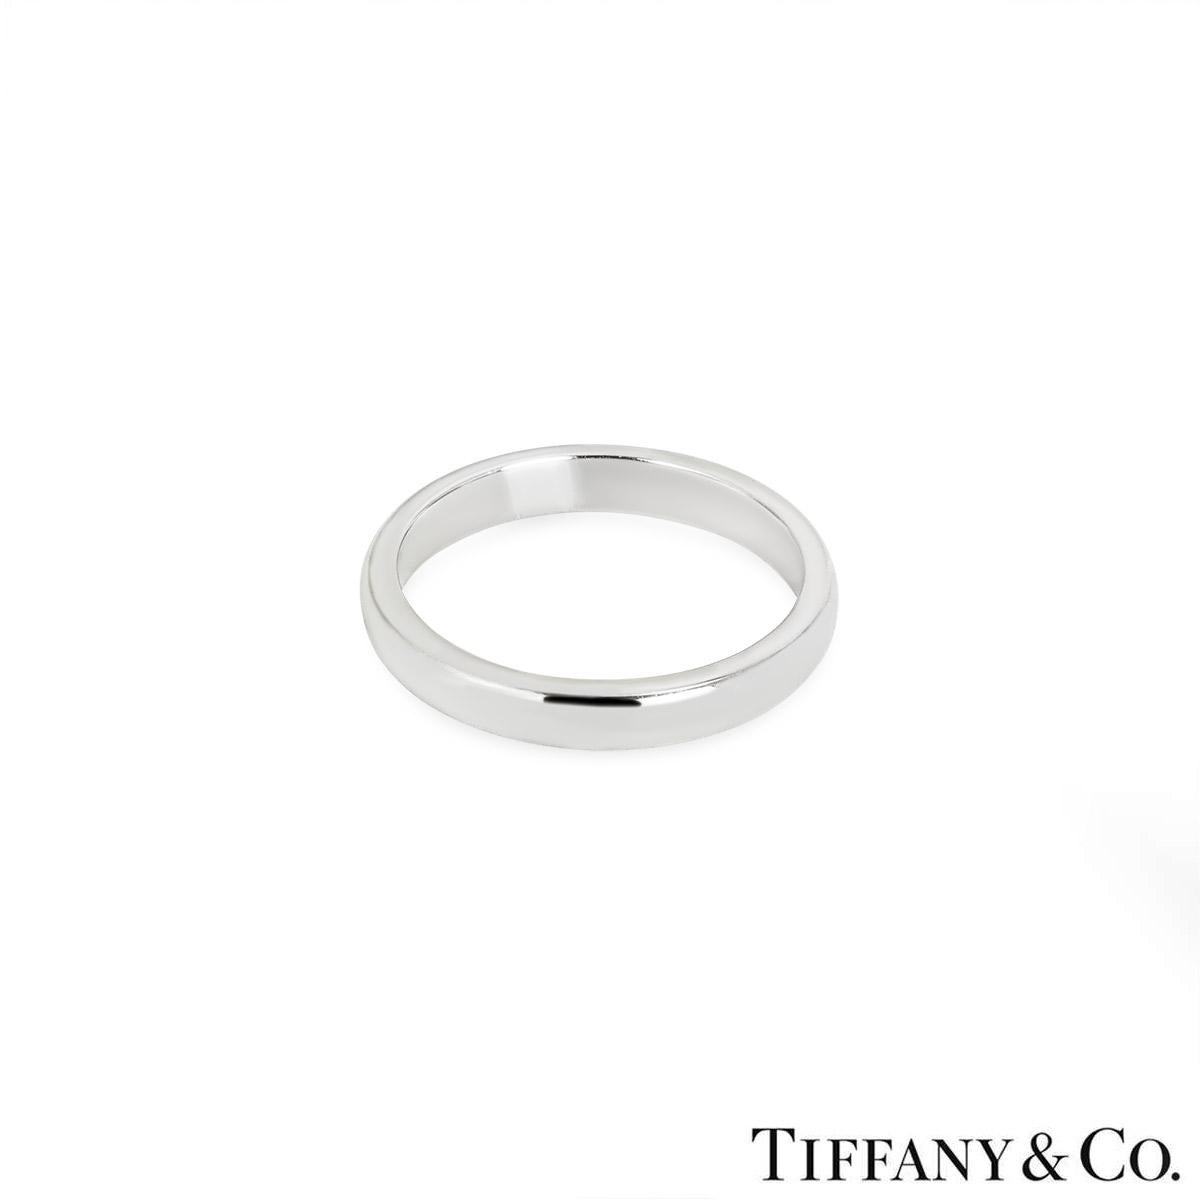 Tiffany & Co. Platinum 3mm Tiffany Forever Wedding Ring In Excellent Condition For Sale In London, GB